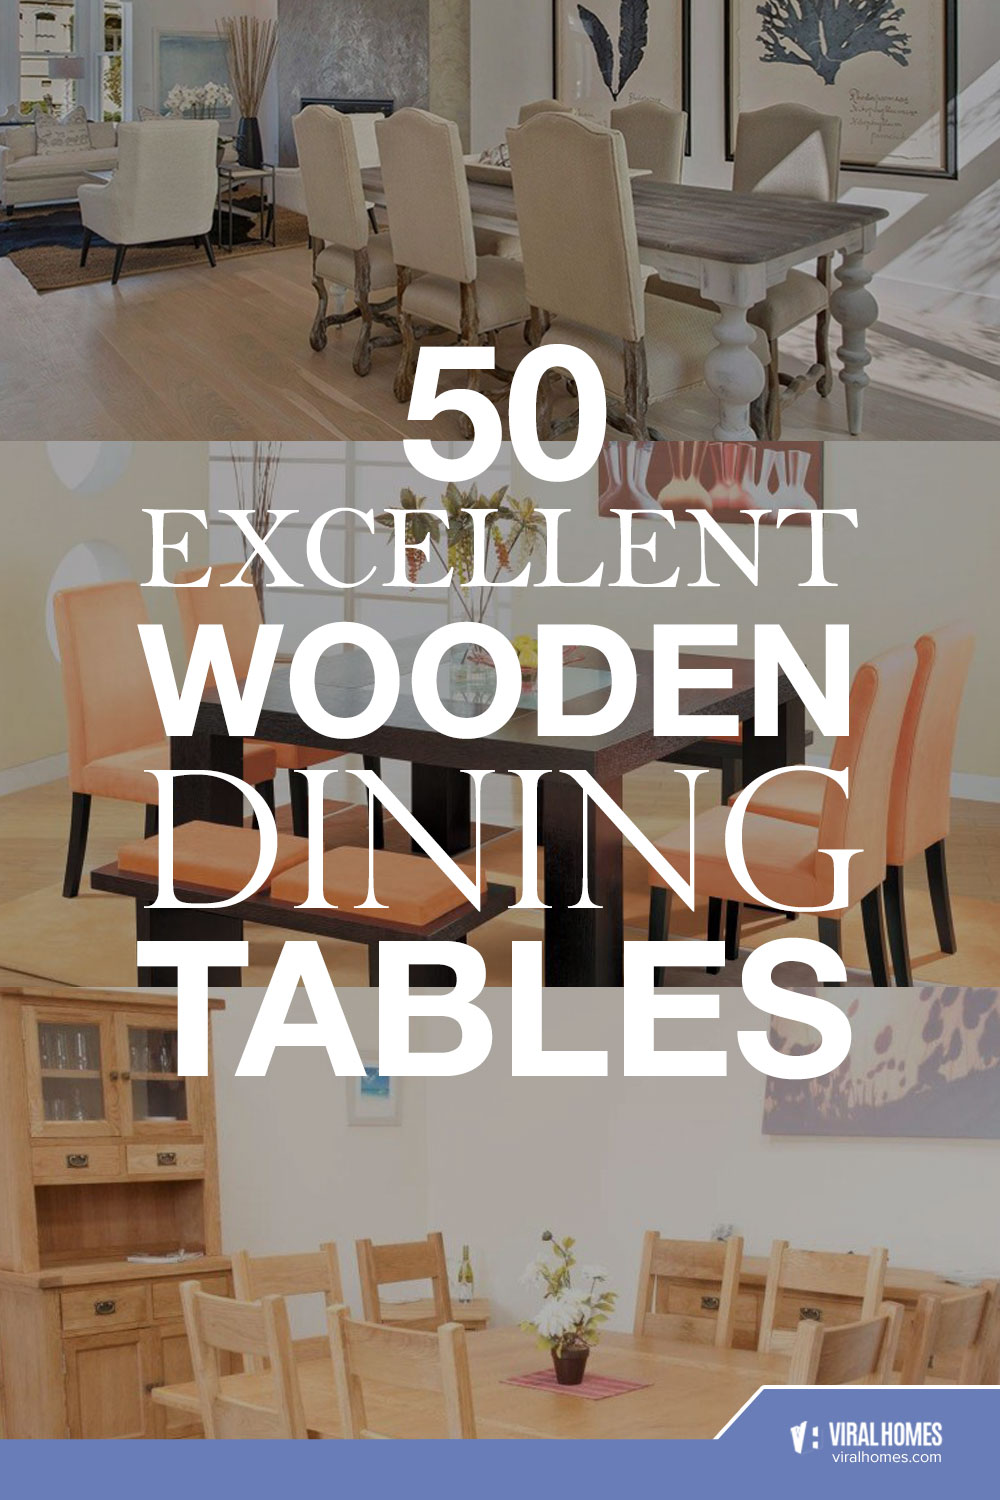 50 Excellent Wooden Dining Table Designs For Your Home